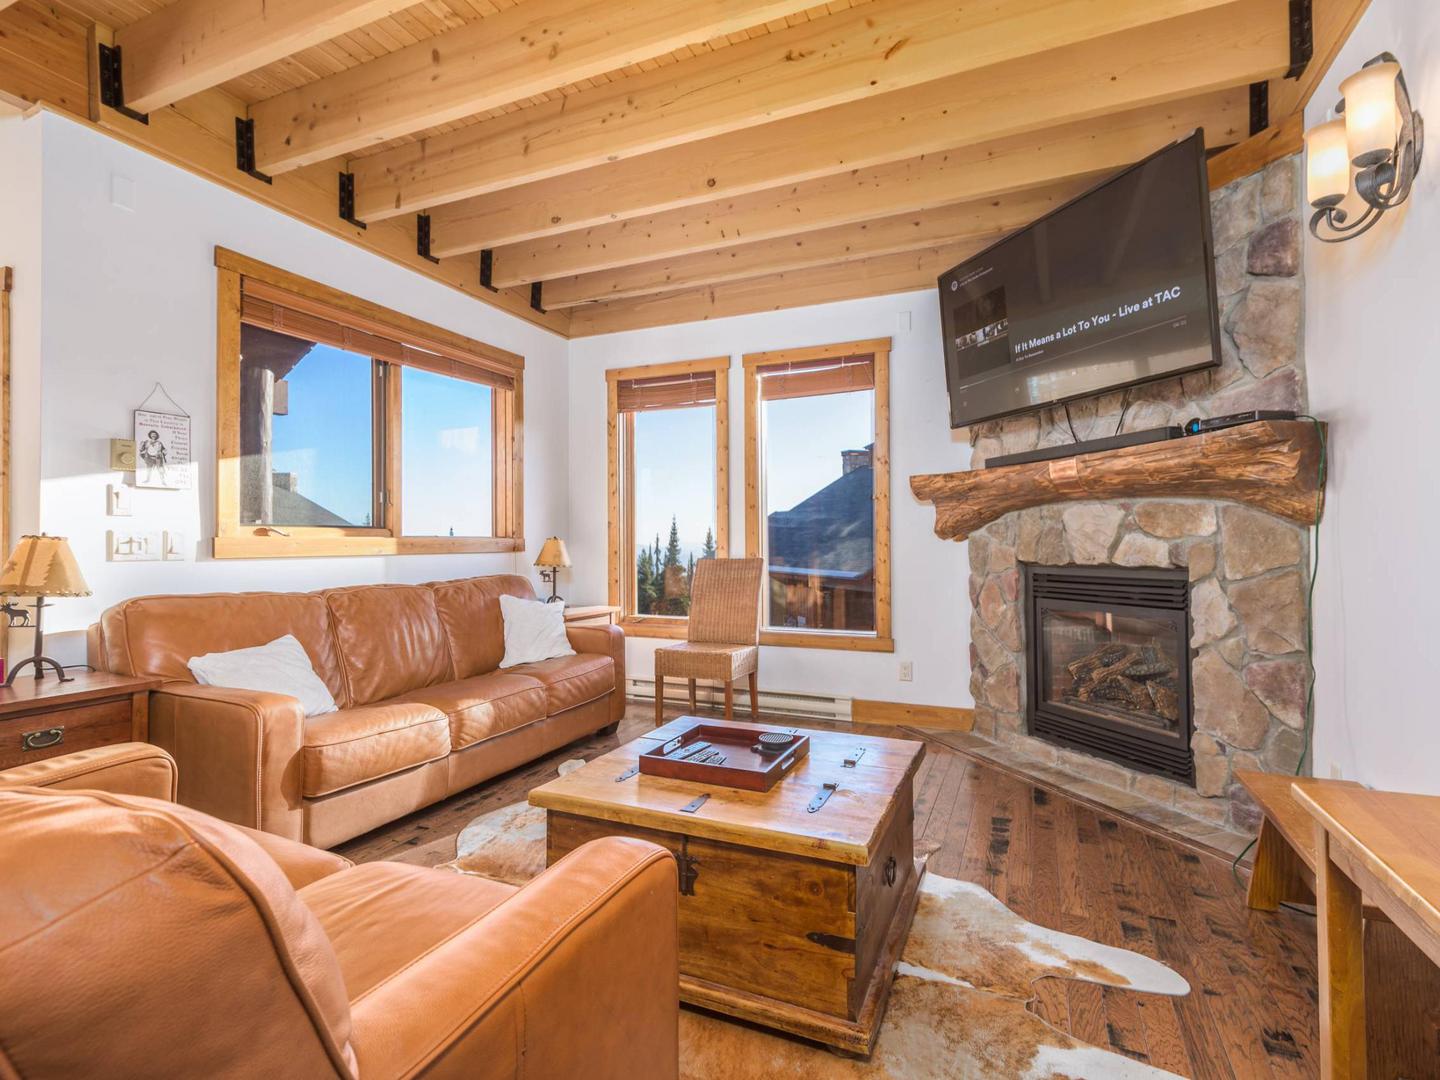 Aspen Meadows' modern living room with comfortable couches, bright natural light and a stone fireplace, managed by Luxury Mountain Vacation Rentals at Big White Ski Resort.